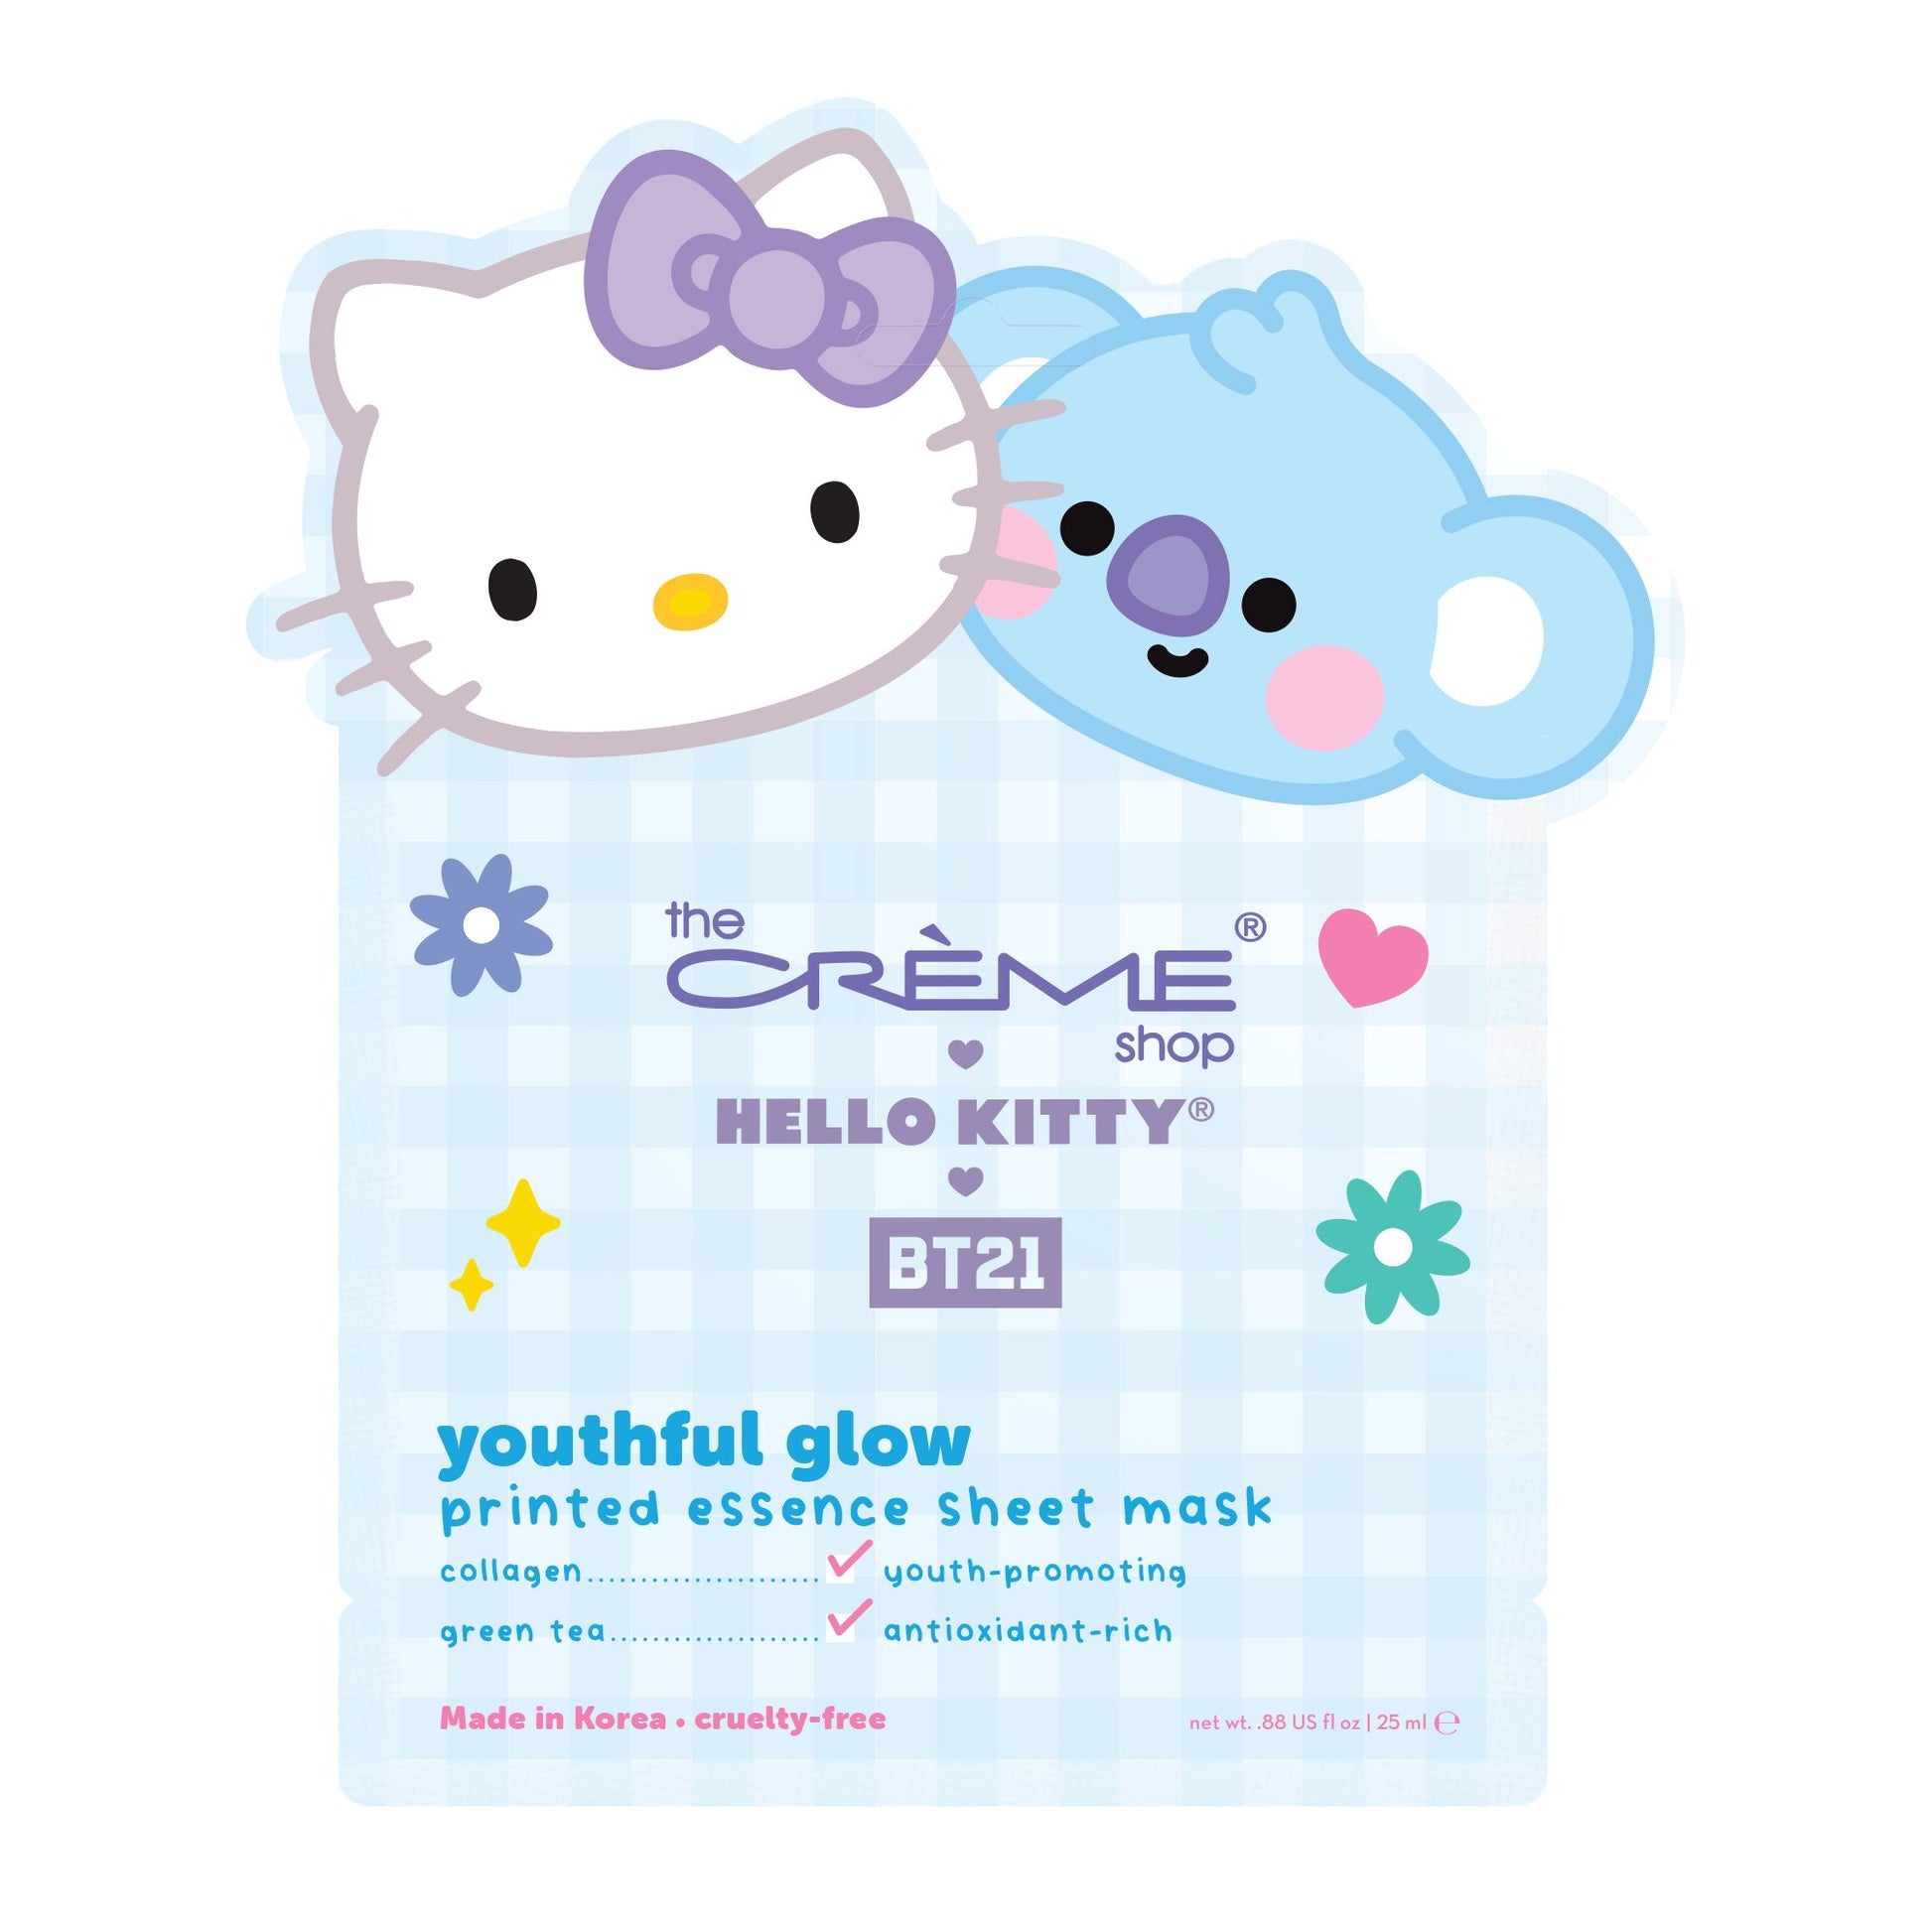 Youth-Promoting and Antioxidant-Rich Hello Kitty & BT21 Youthful Glow Printed Essence Sheet Mask, $4 